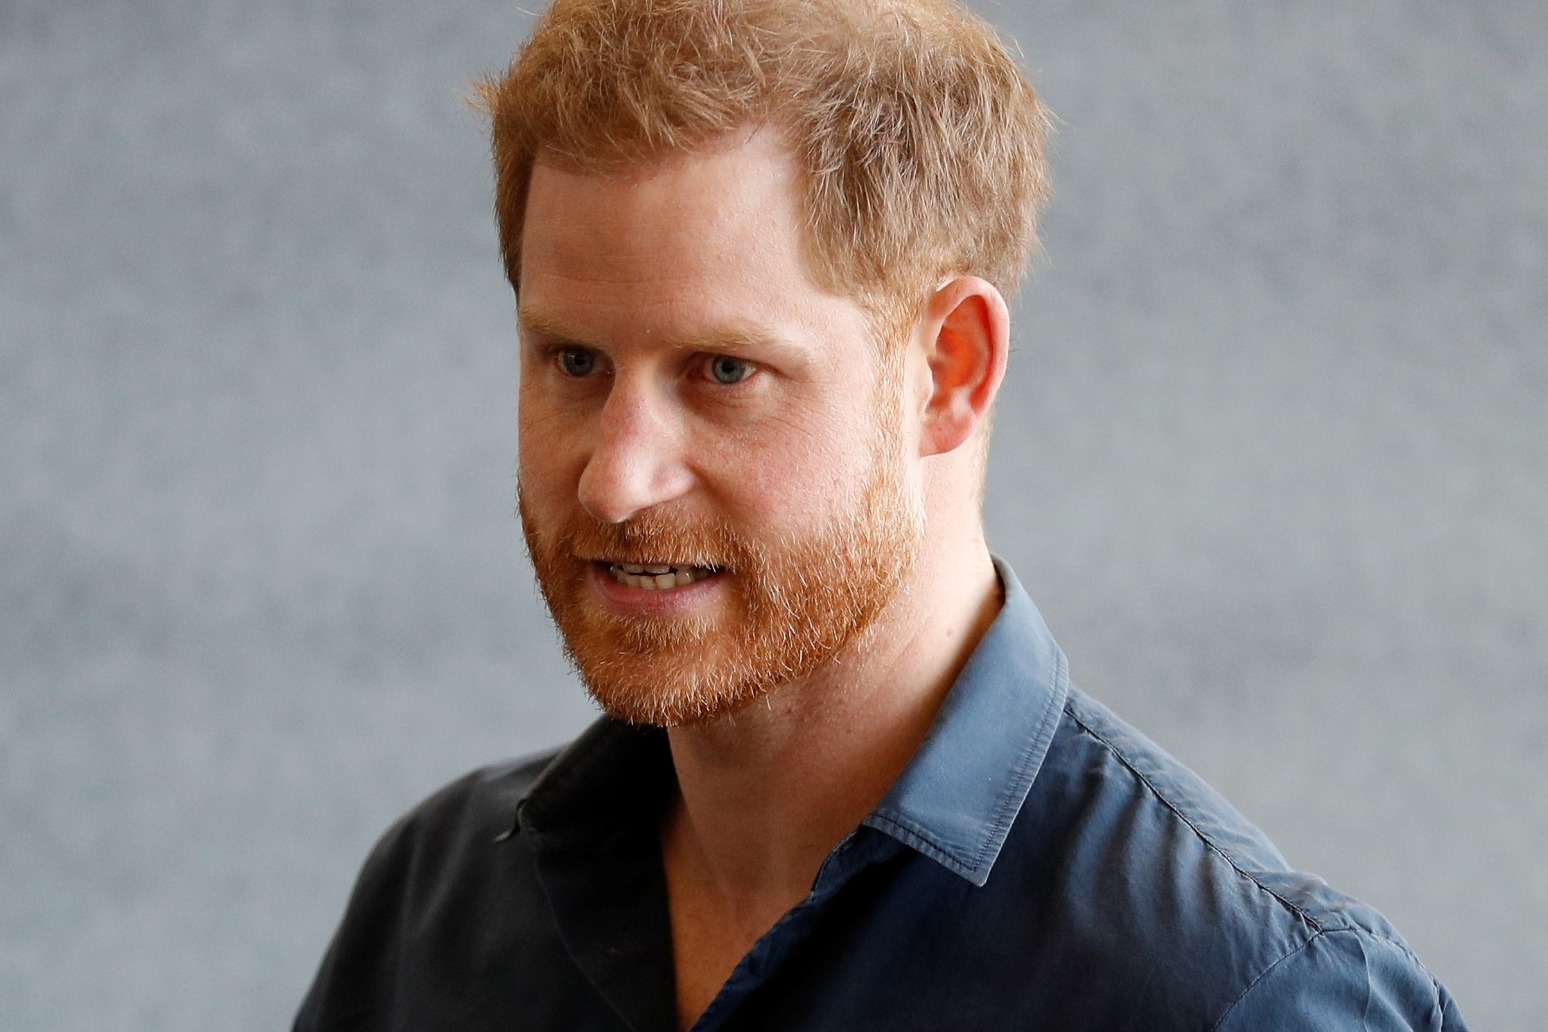 Duke of Sussex issues libel claim against publisher of The Mail 